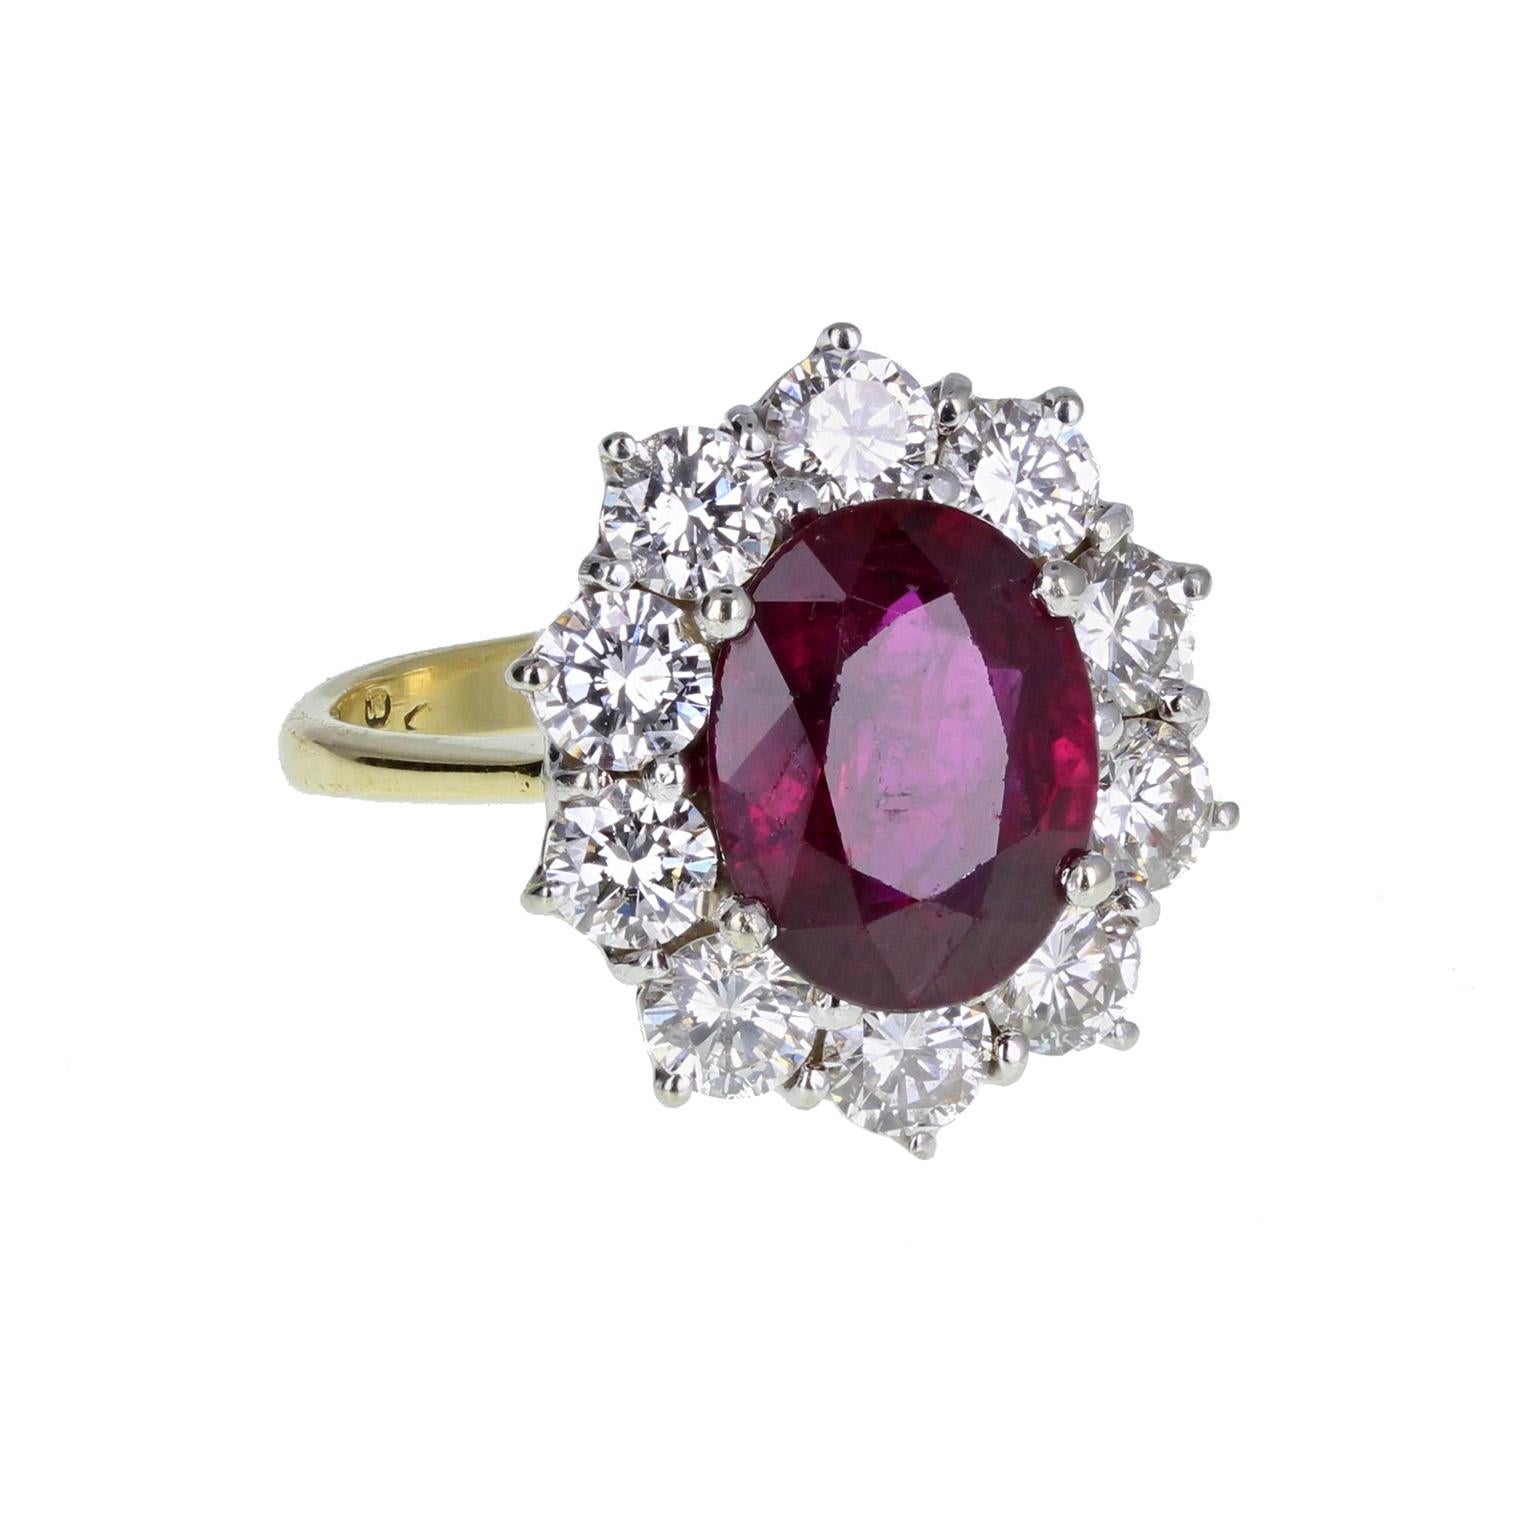 A fine and impressive oval cluster ring. A central oval brilliant-cut blood-red ruby, mounted in four claws, surrounded by ten round, brilliant-cut diamonds. 18-carat yellow gold shank with tapering shoulders, hallmarked London 1994. Ruby Weight: